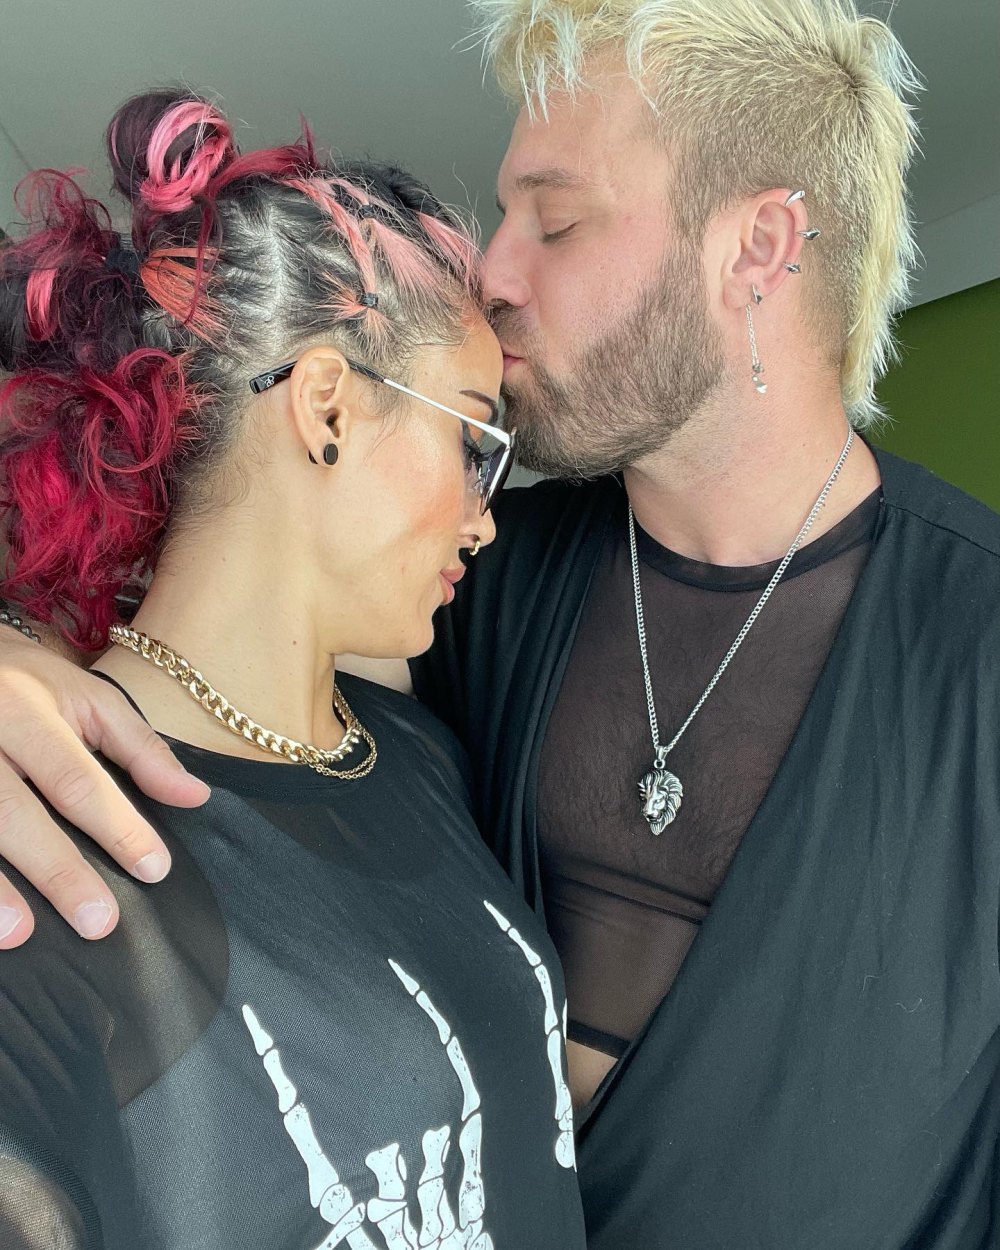 Here the Truth About Those Paulie and Cara Maria Breakup Rumors